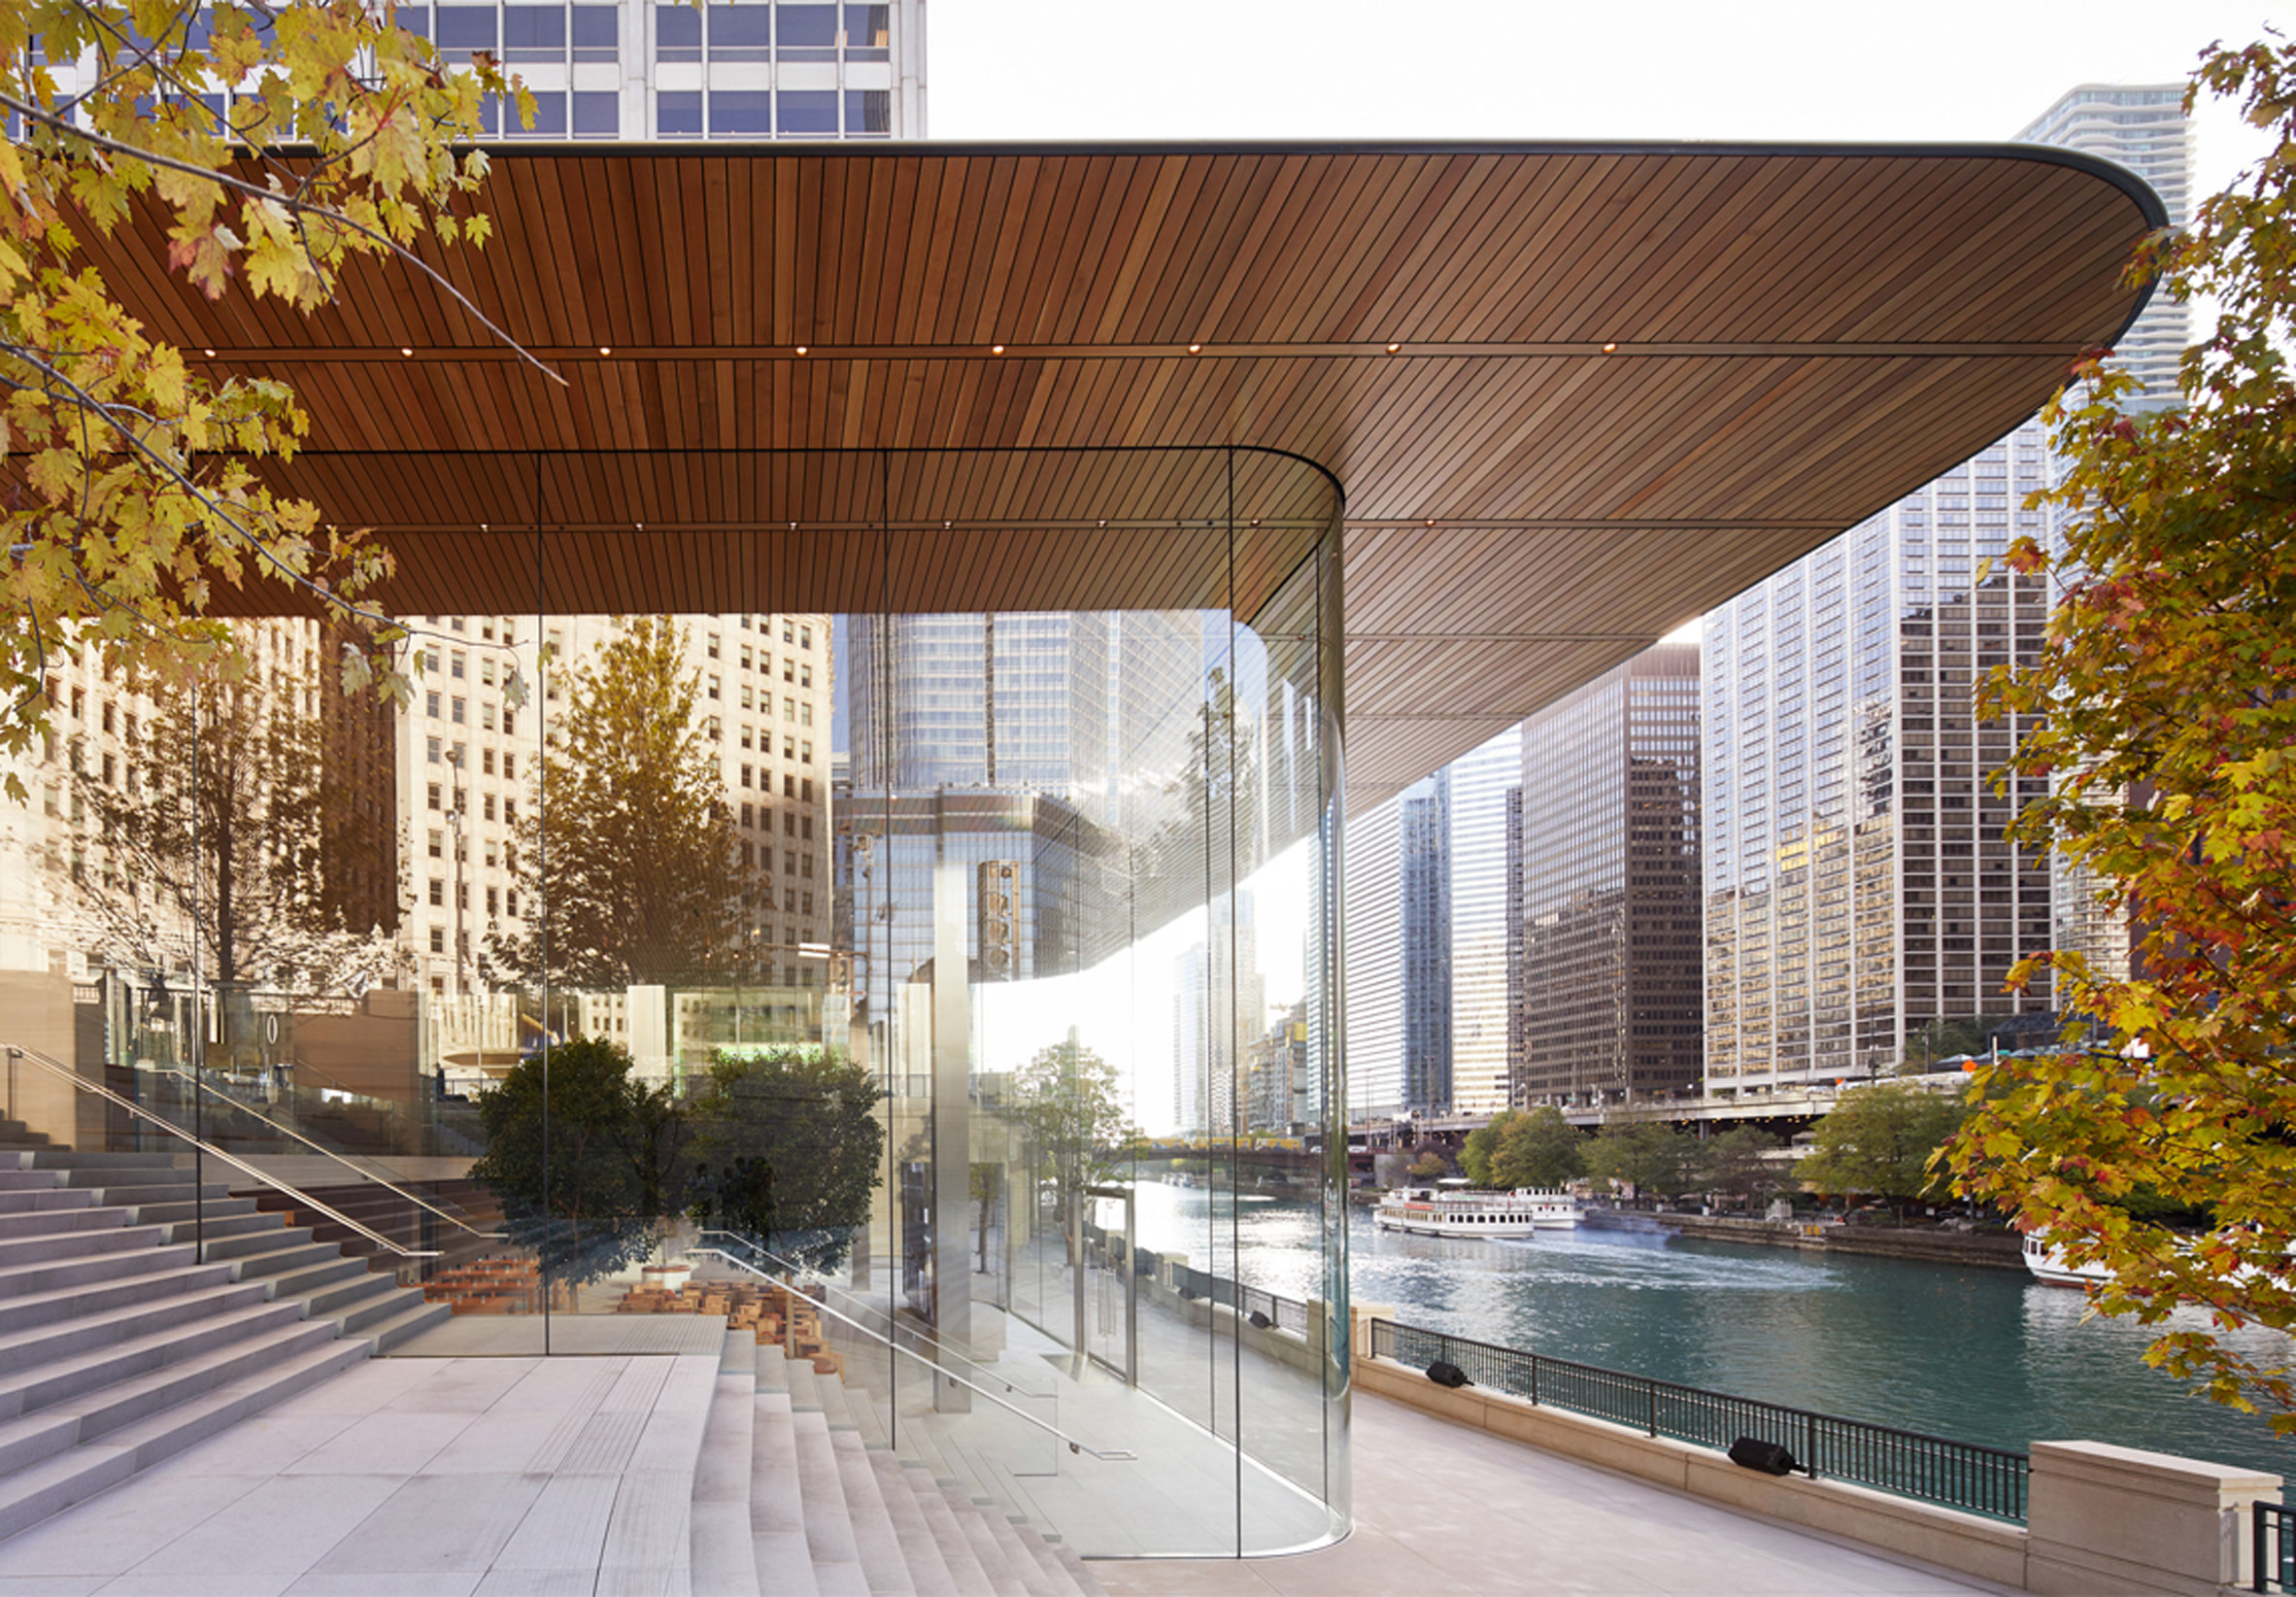 Apple blames software, not roof design, for Chicago Apple Store roped off  by snow - 9to5Mac